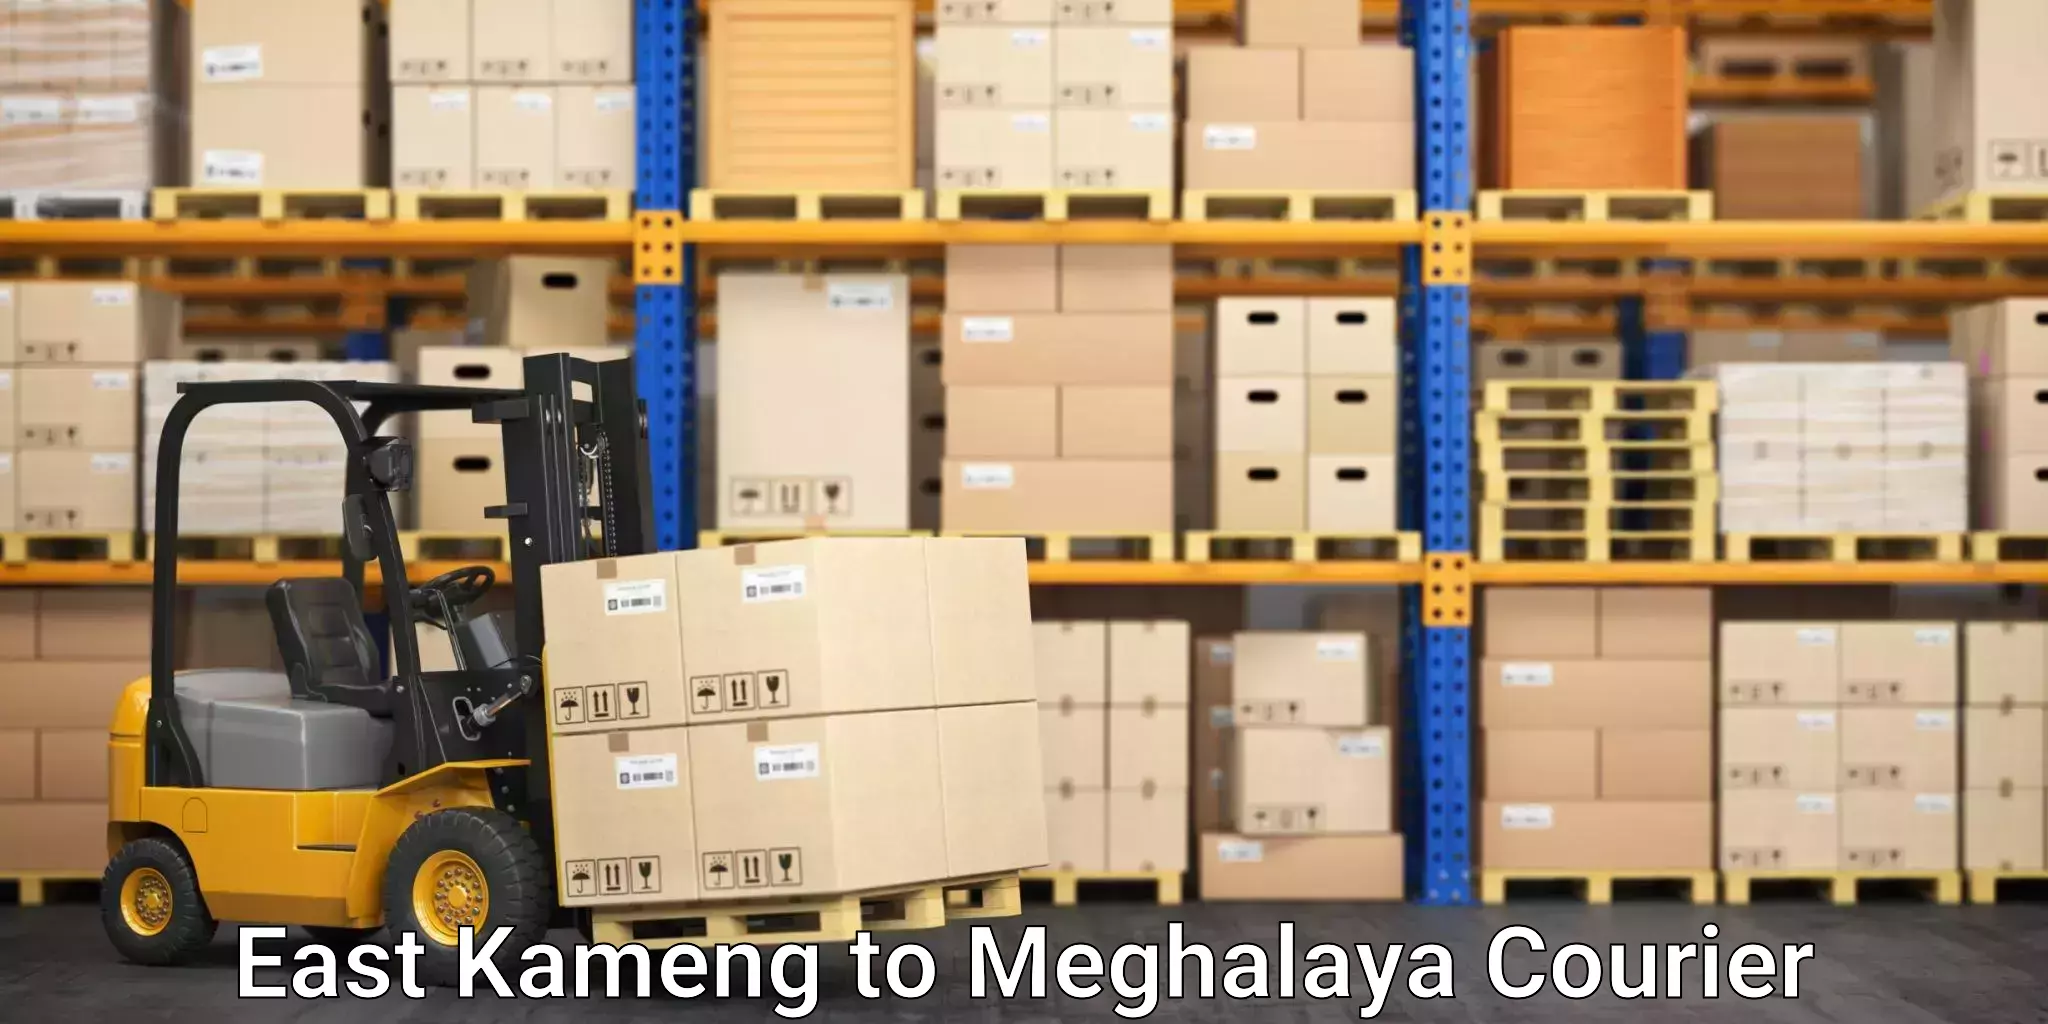 Rapid freight solutions East Kameng to Meghalaya